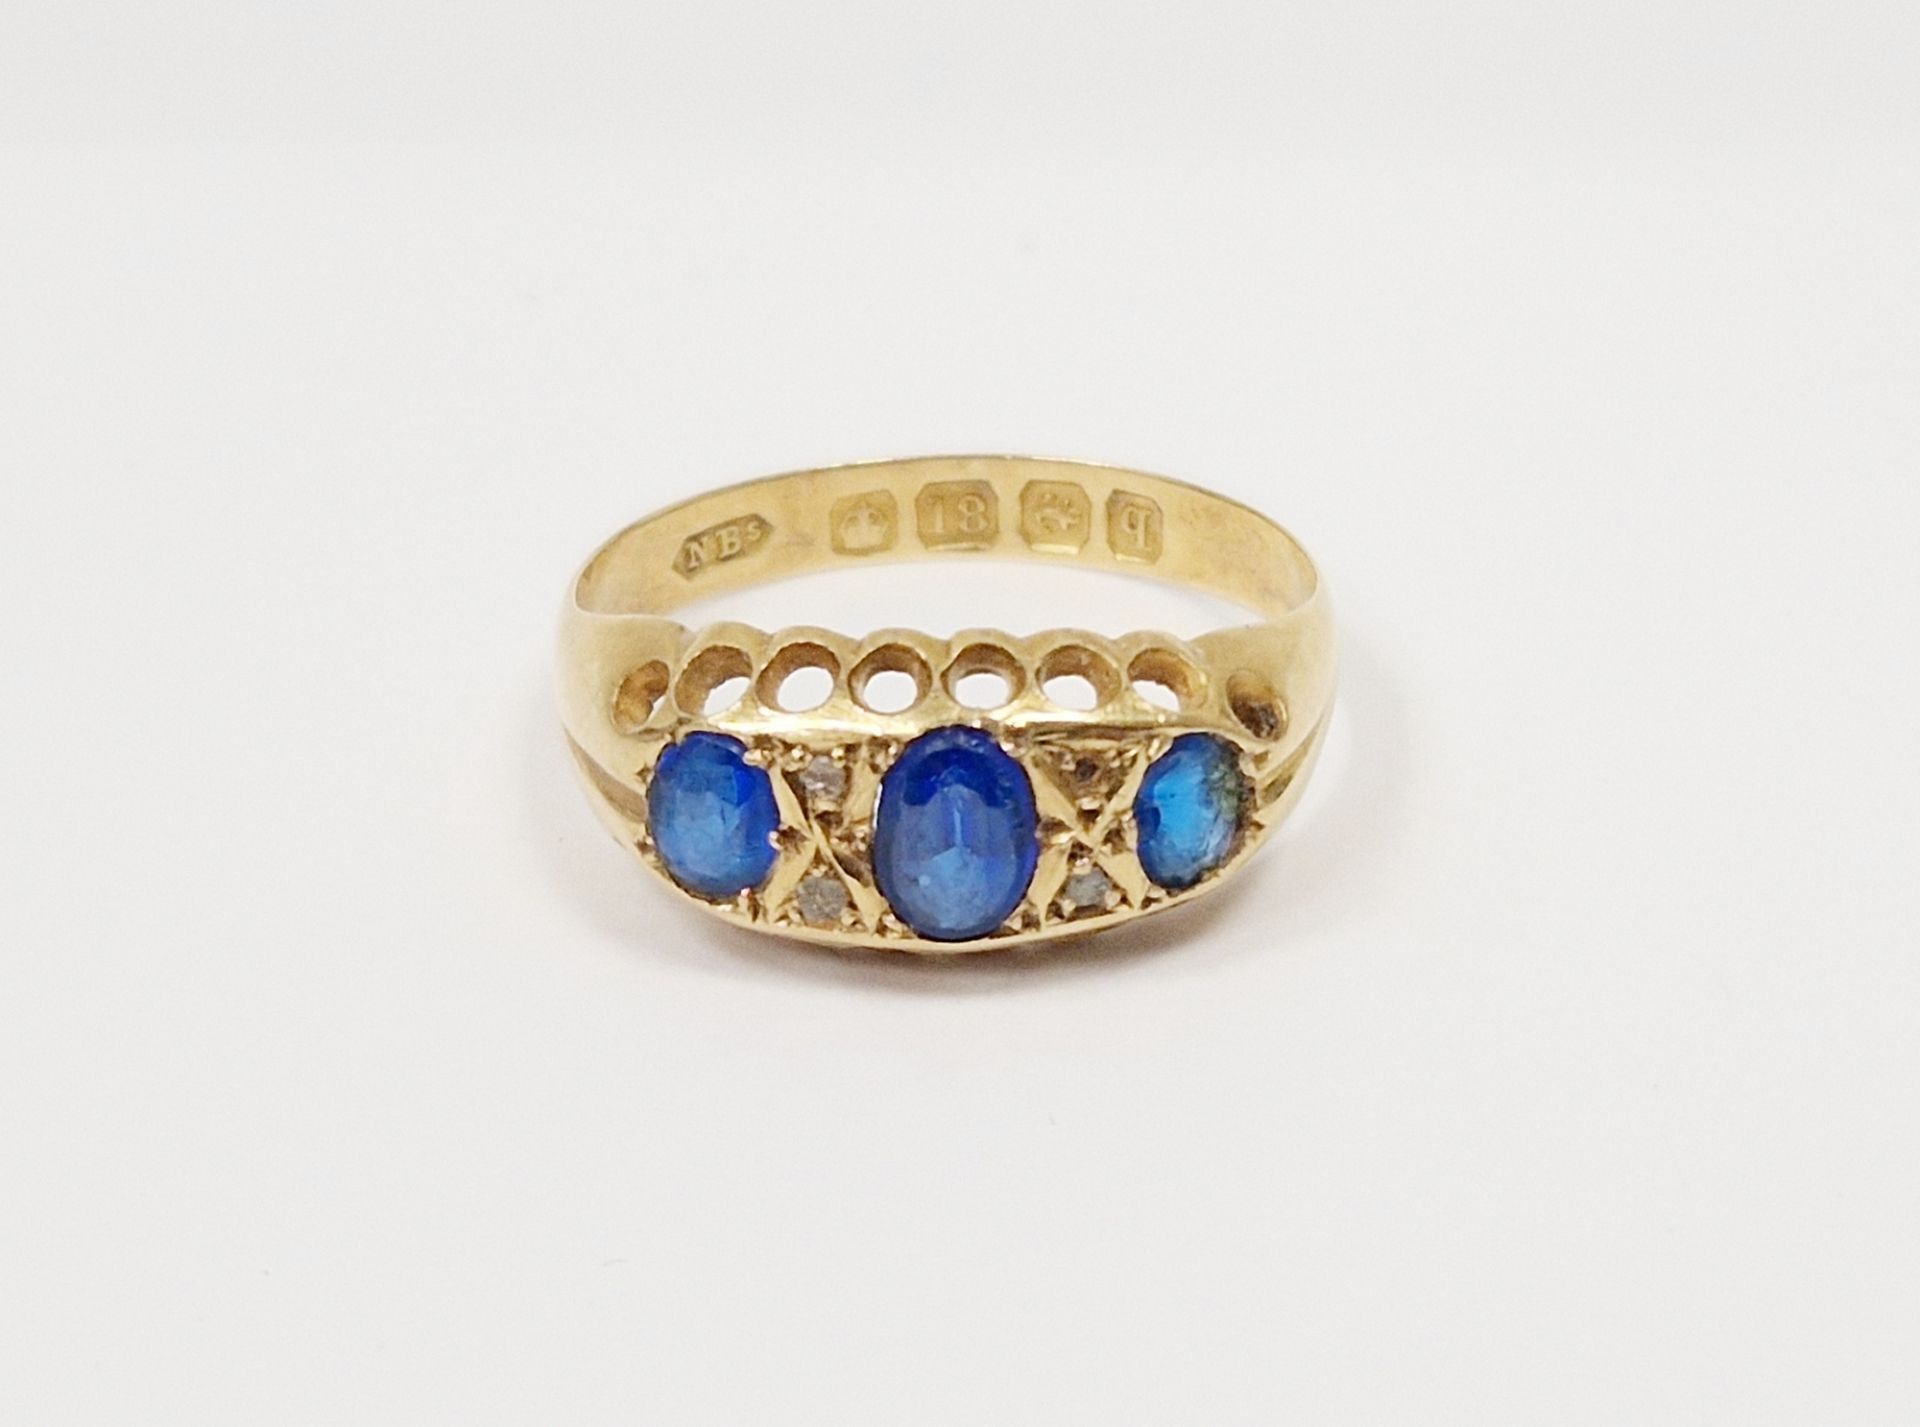 18ct gold and blue stone ring set three oval facet-cut graduated stones alternating with four tiny